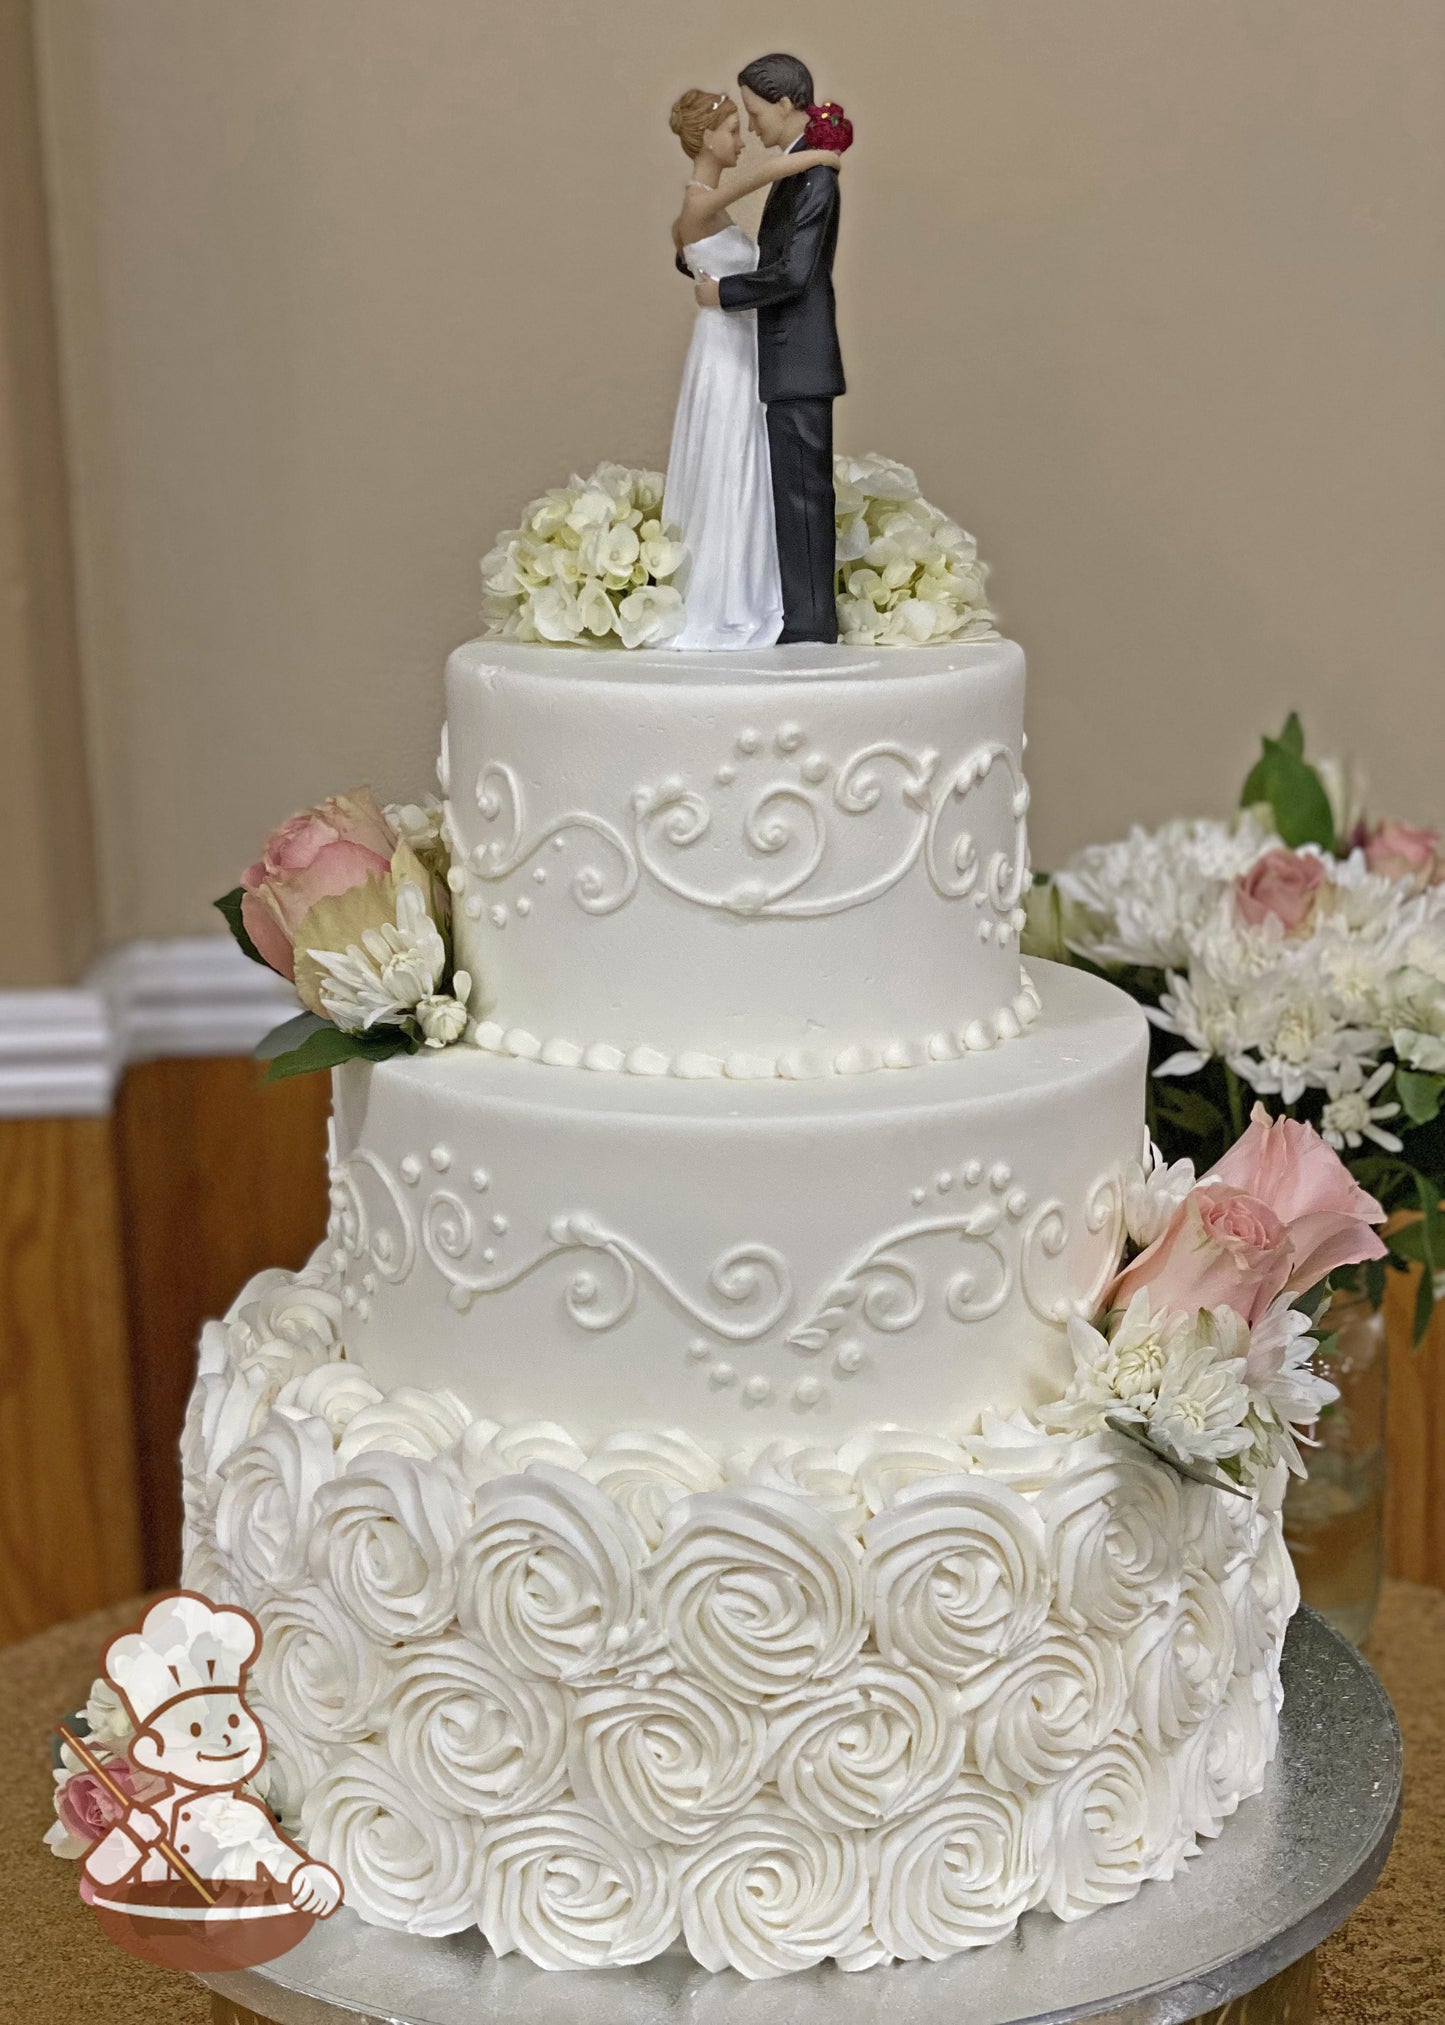 3 tier wedding cake with rosette swirls and elegant piping design finished with fresh flowers and traditional cake topper.